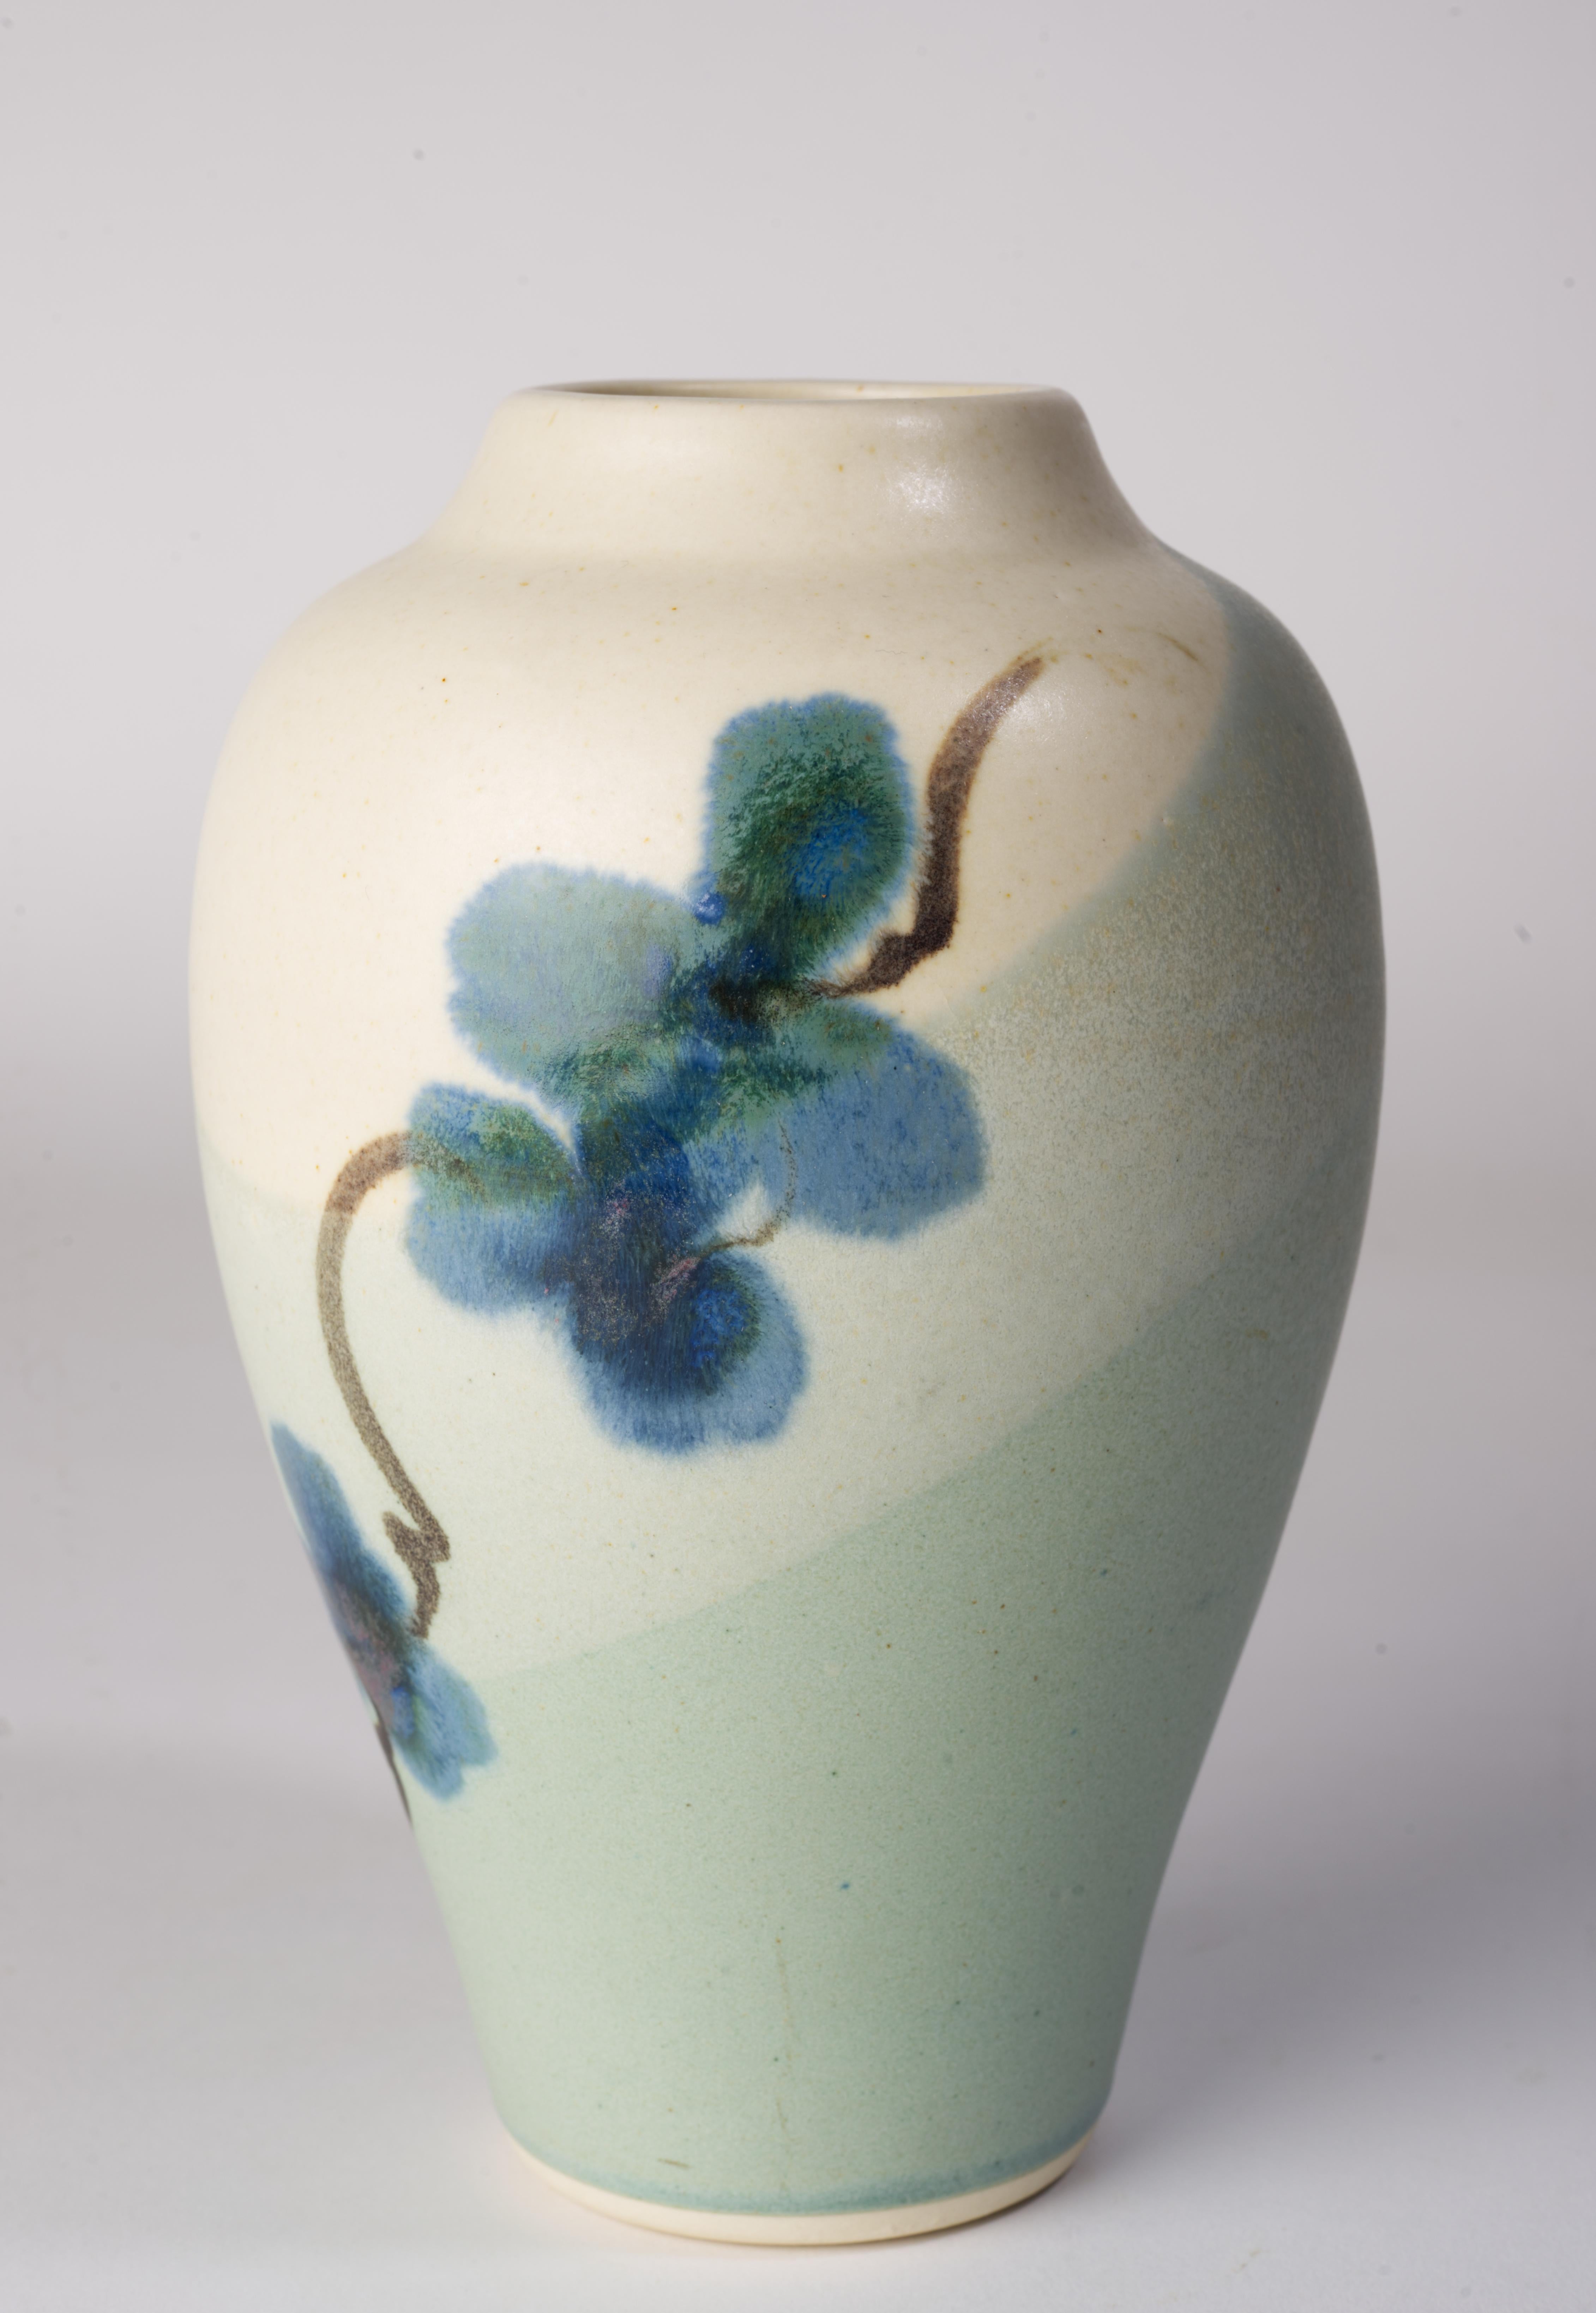  Vintage ceramic bud vase was made by Kent Follette in minimal, organic modern style. The vase is decorated with abstract flower design in various shades of blue with brown stems; the background is done in semi-matte light beige and blue glaze.